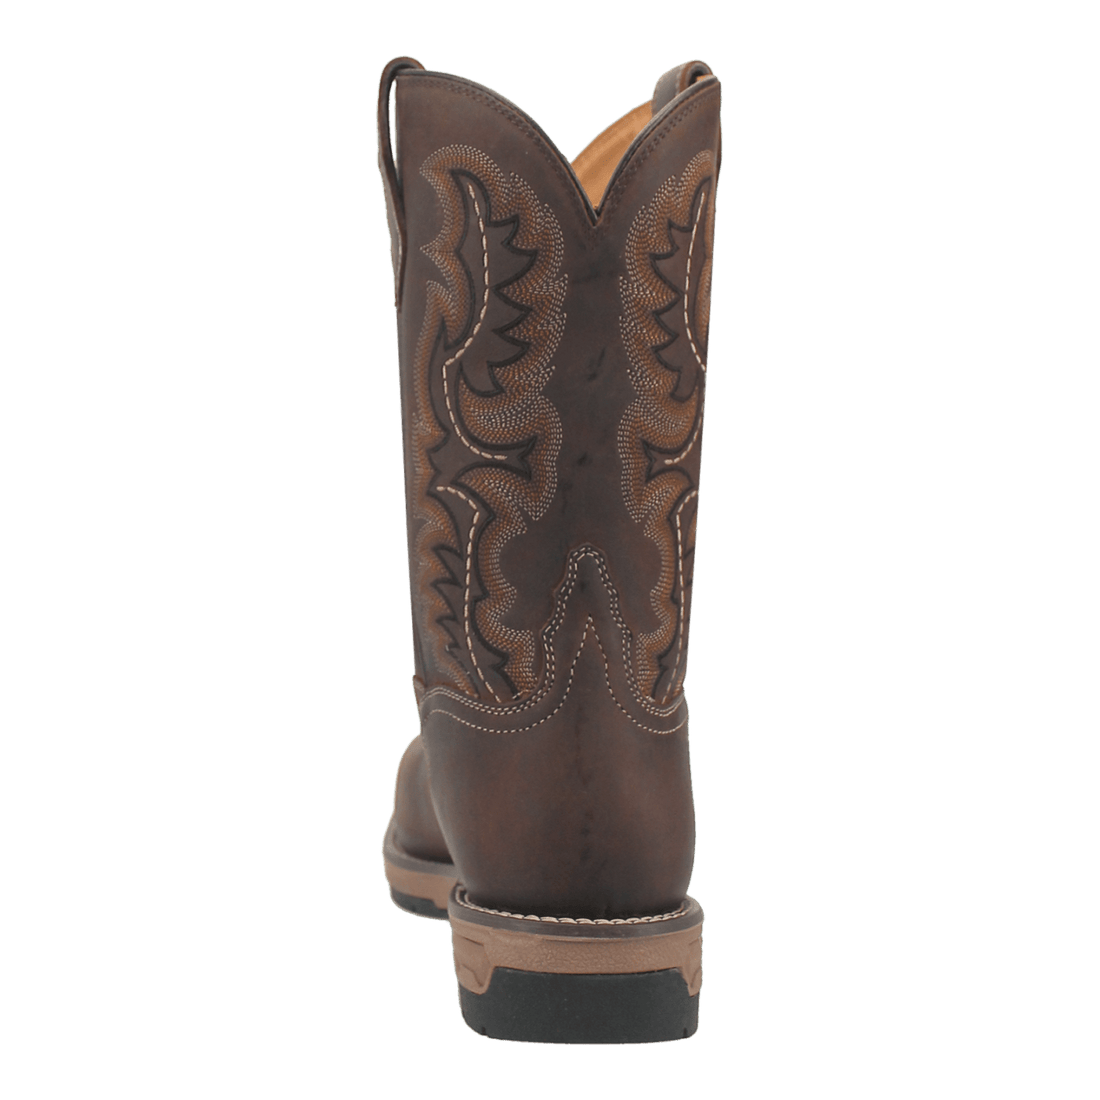 STRINGFELLOW STEEL TOE LEATHER BOOT Preview #15